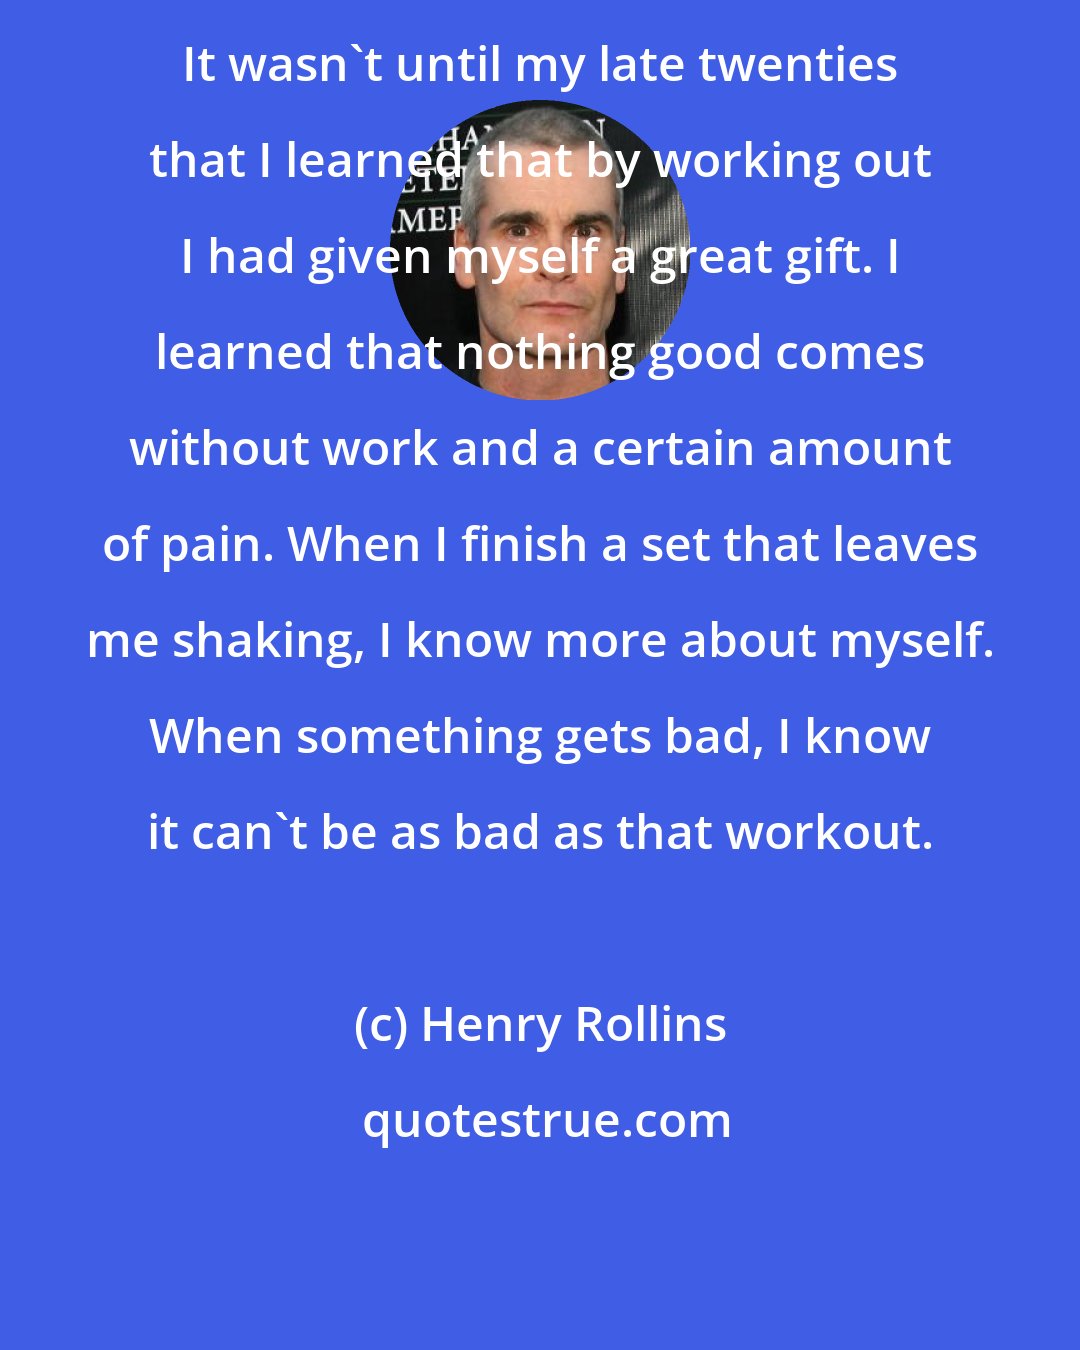 Henry Rollins: It wasn't until my late twenties that I learned that by working out I had given myself a great gift. I learned that nothing good comes without work and a certain amount of pain. When I finish a set that leaves me shaking, I know more about myself. When something gets bad, I know it can't be as bad as that workout.